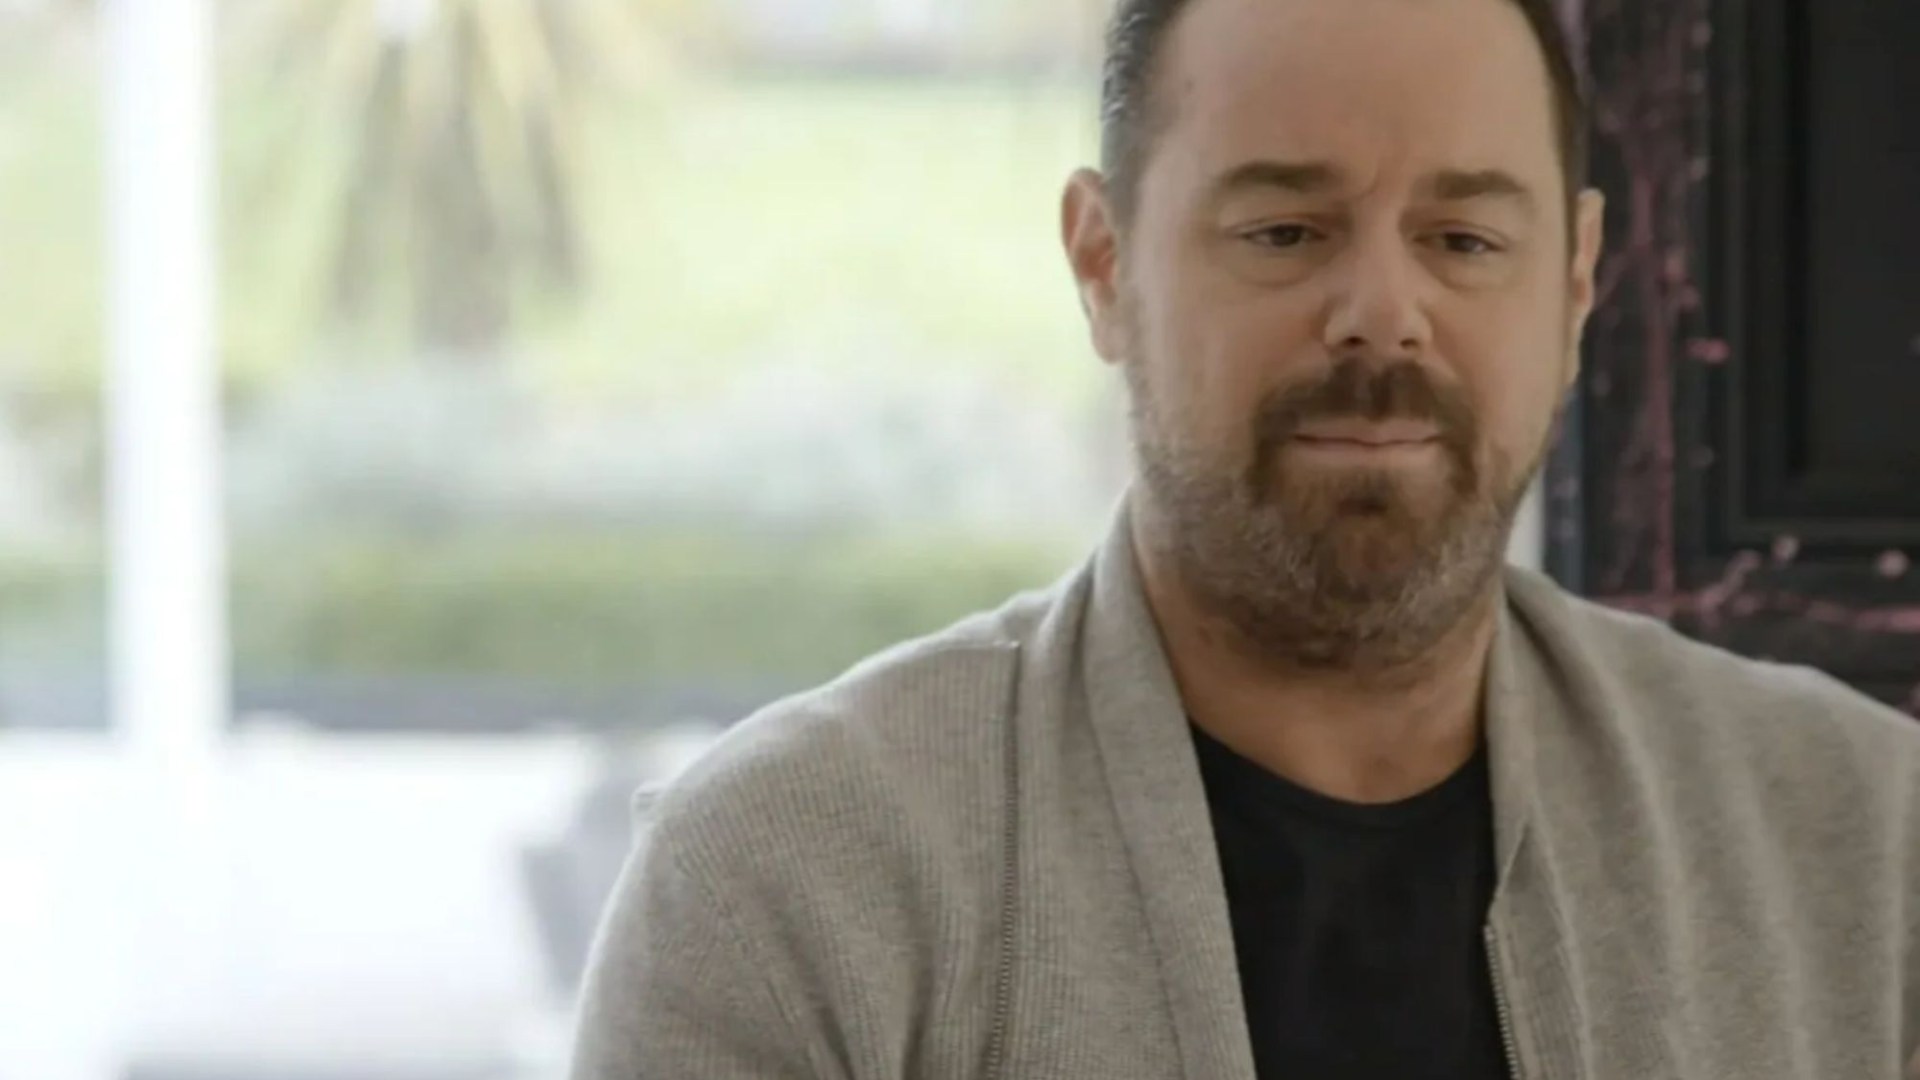 Danny Dyer Opens Up on Troubled Childhood, Admitting ‘That Killed Me’ – A Powerful Journey of Healing and Redemption